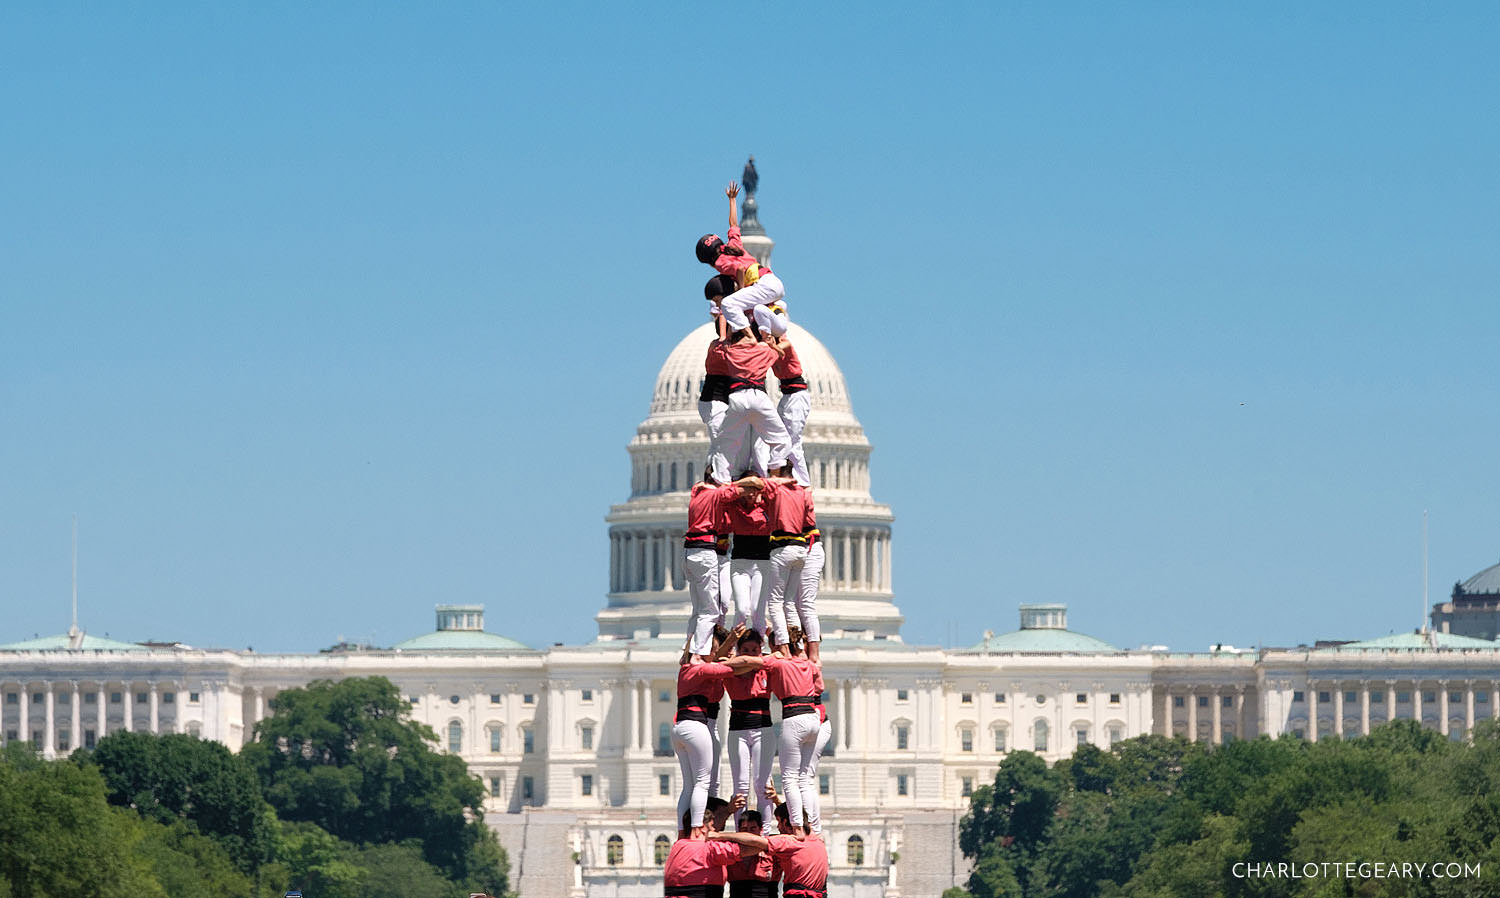 Catalan human tower at the Smithsonian Folklife Festival